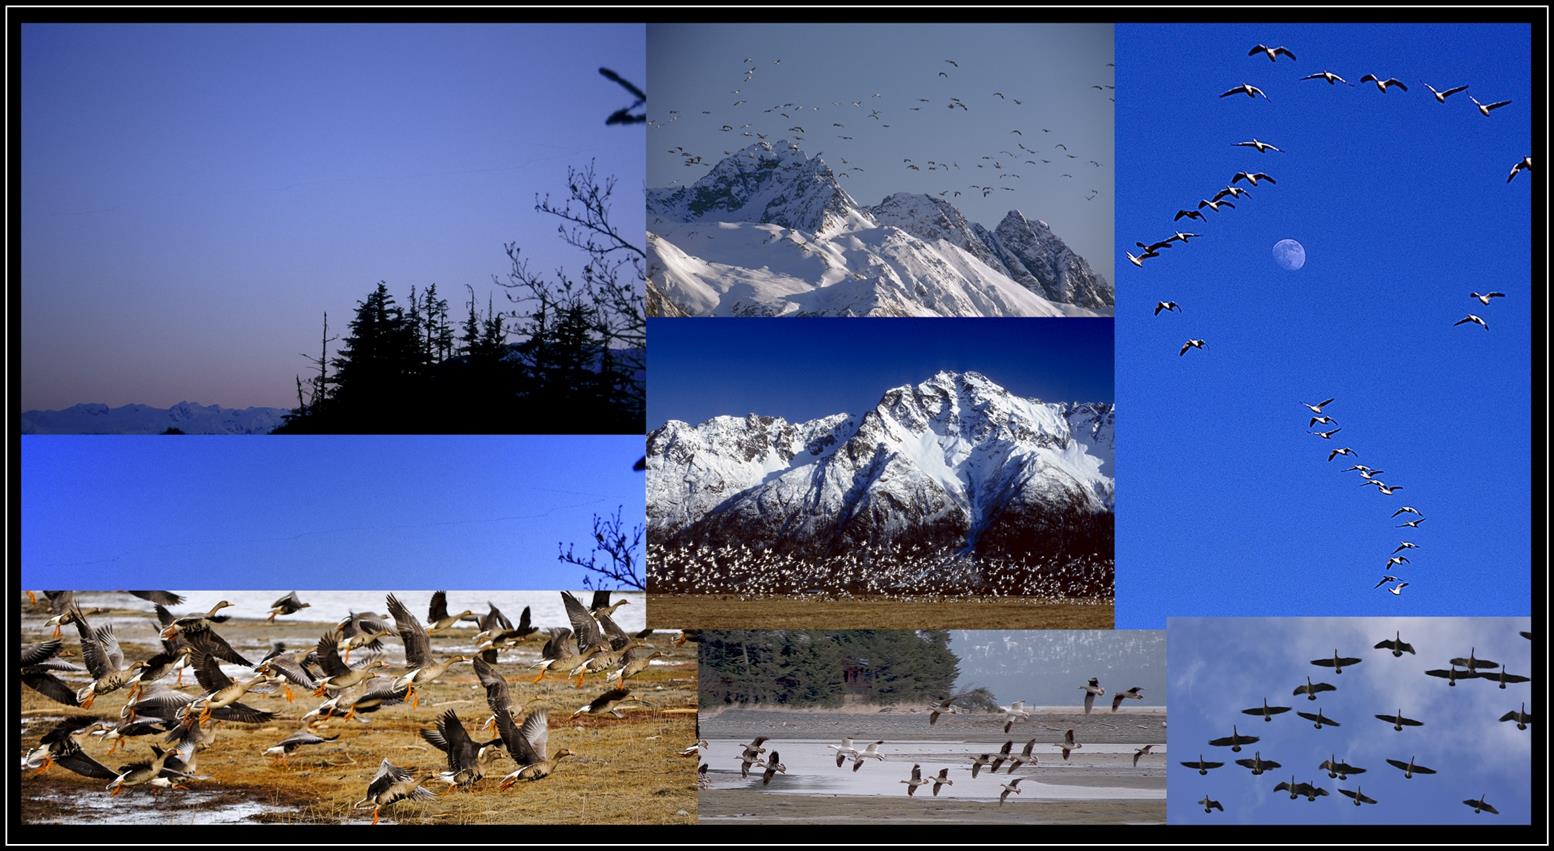 Images of migrating birds